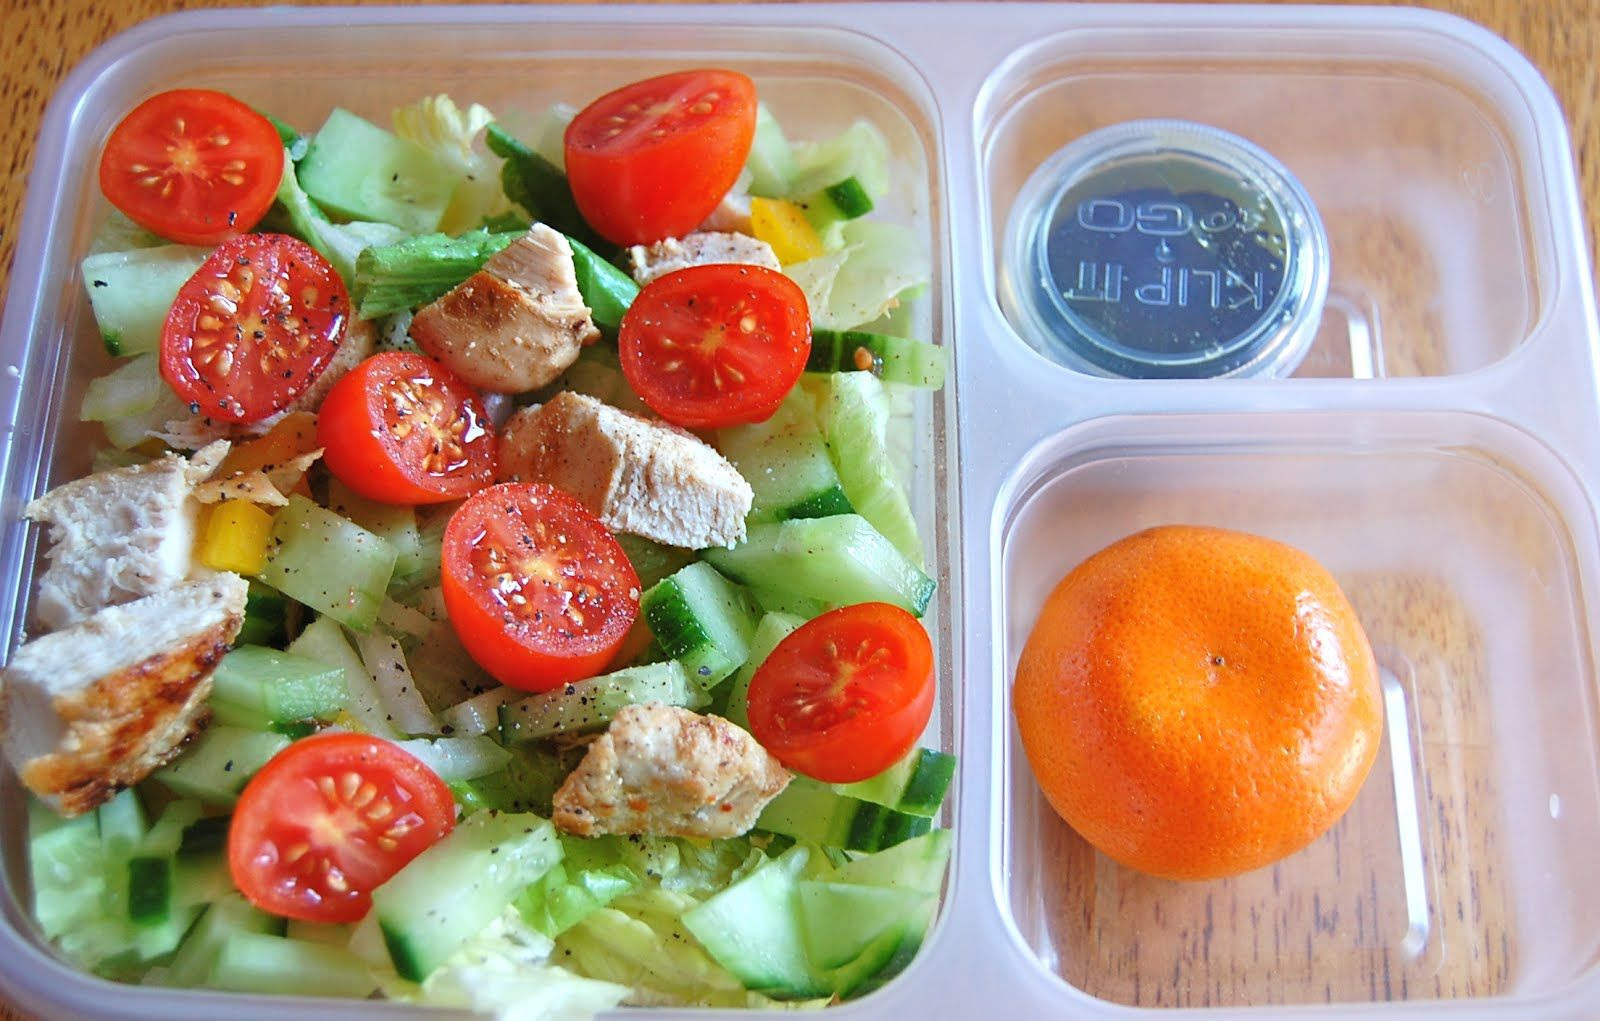 Healthy Snacks And Lunches
 This girl has awesome tips on eating clean and staying